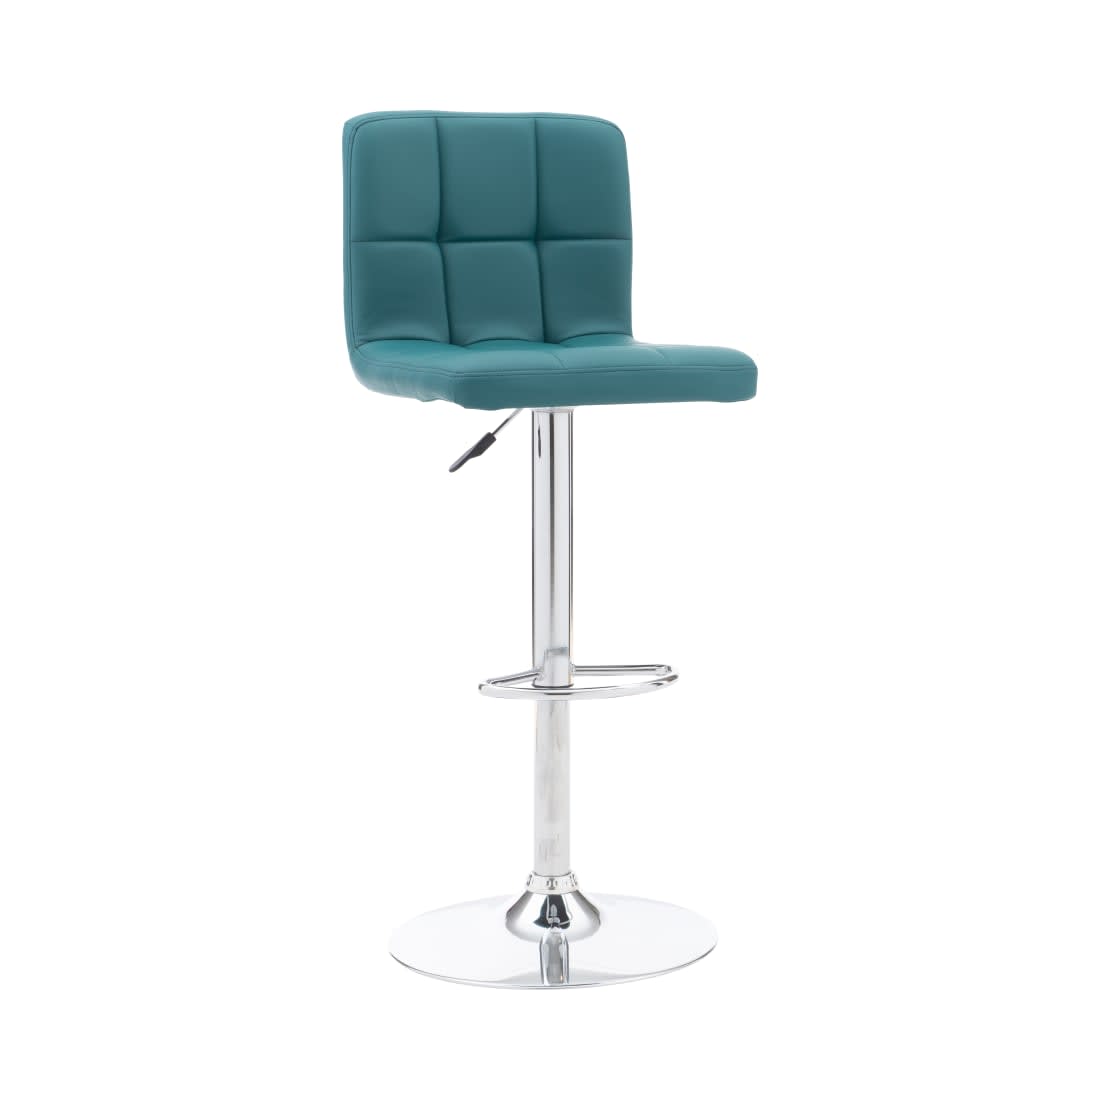 Teal Faux Leather Barstool, Teal Colored Leather Bar Stools